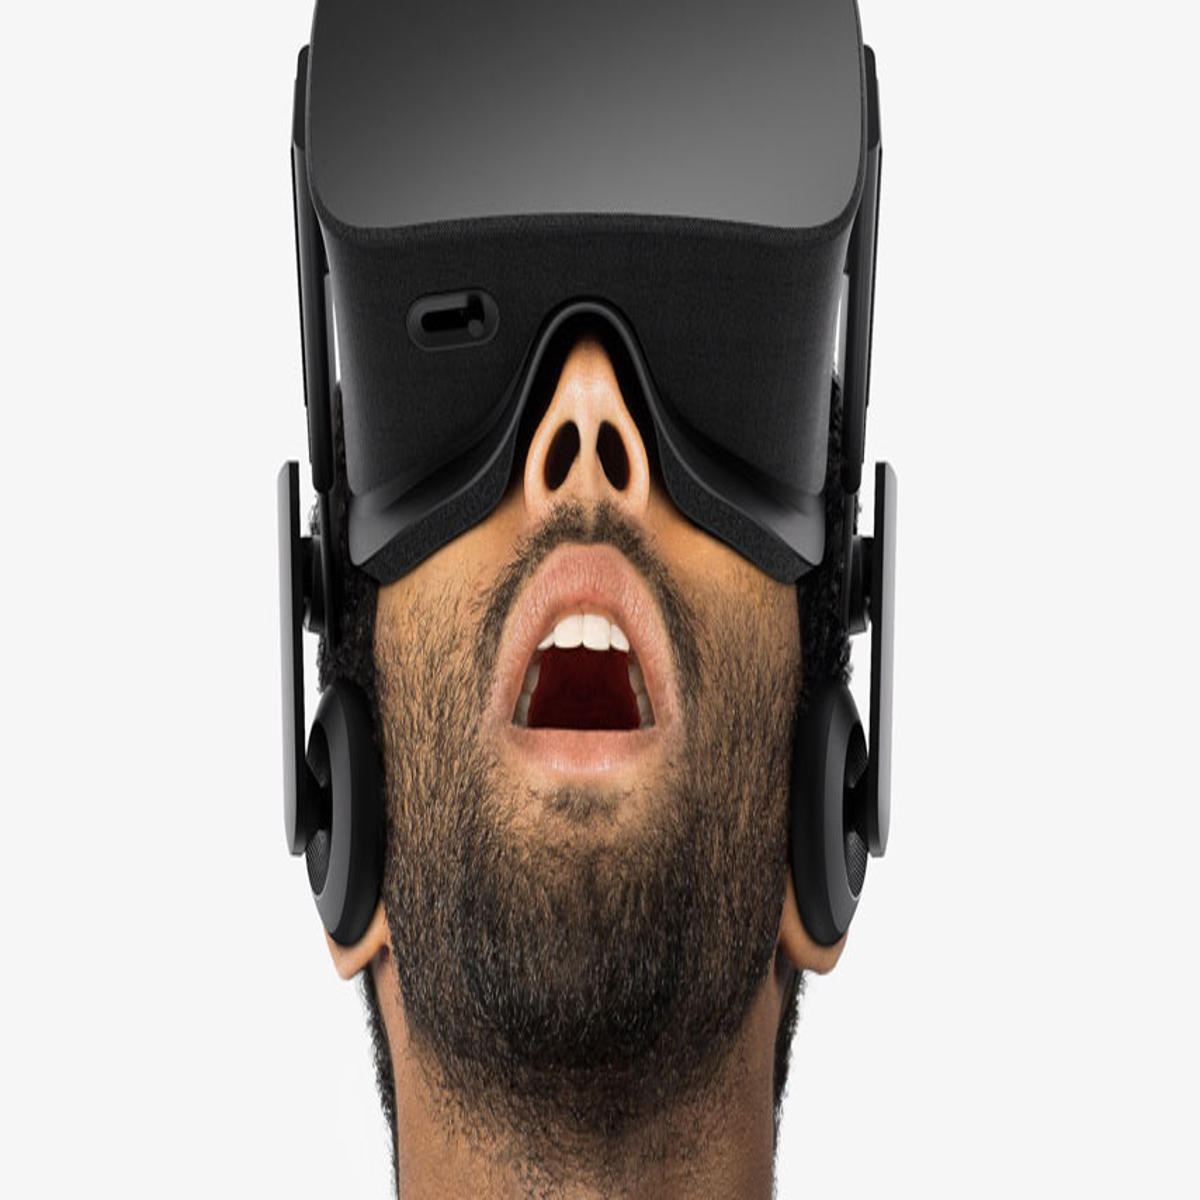 Oculus Rift virtual reality headset finally available for pre-order – at  $600, Virtual reality